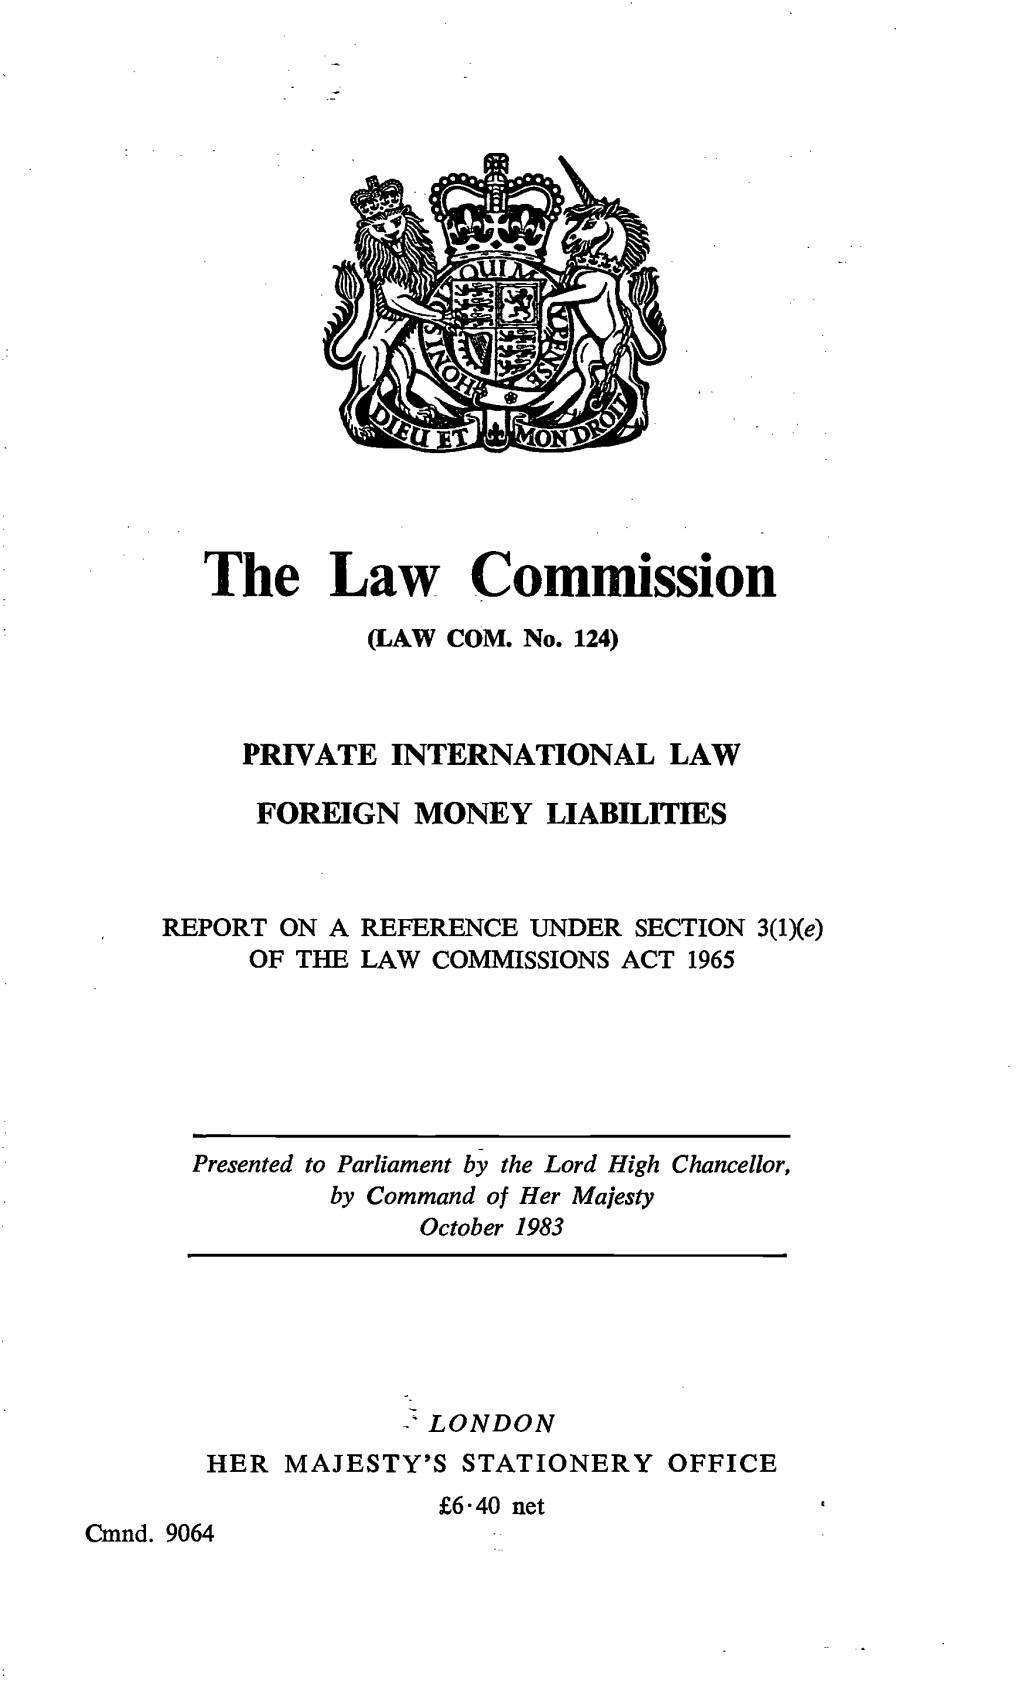 Private International Law: Foreign Money Liabilities Report